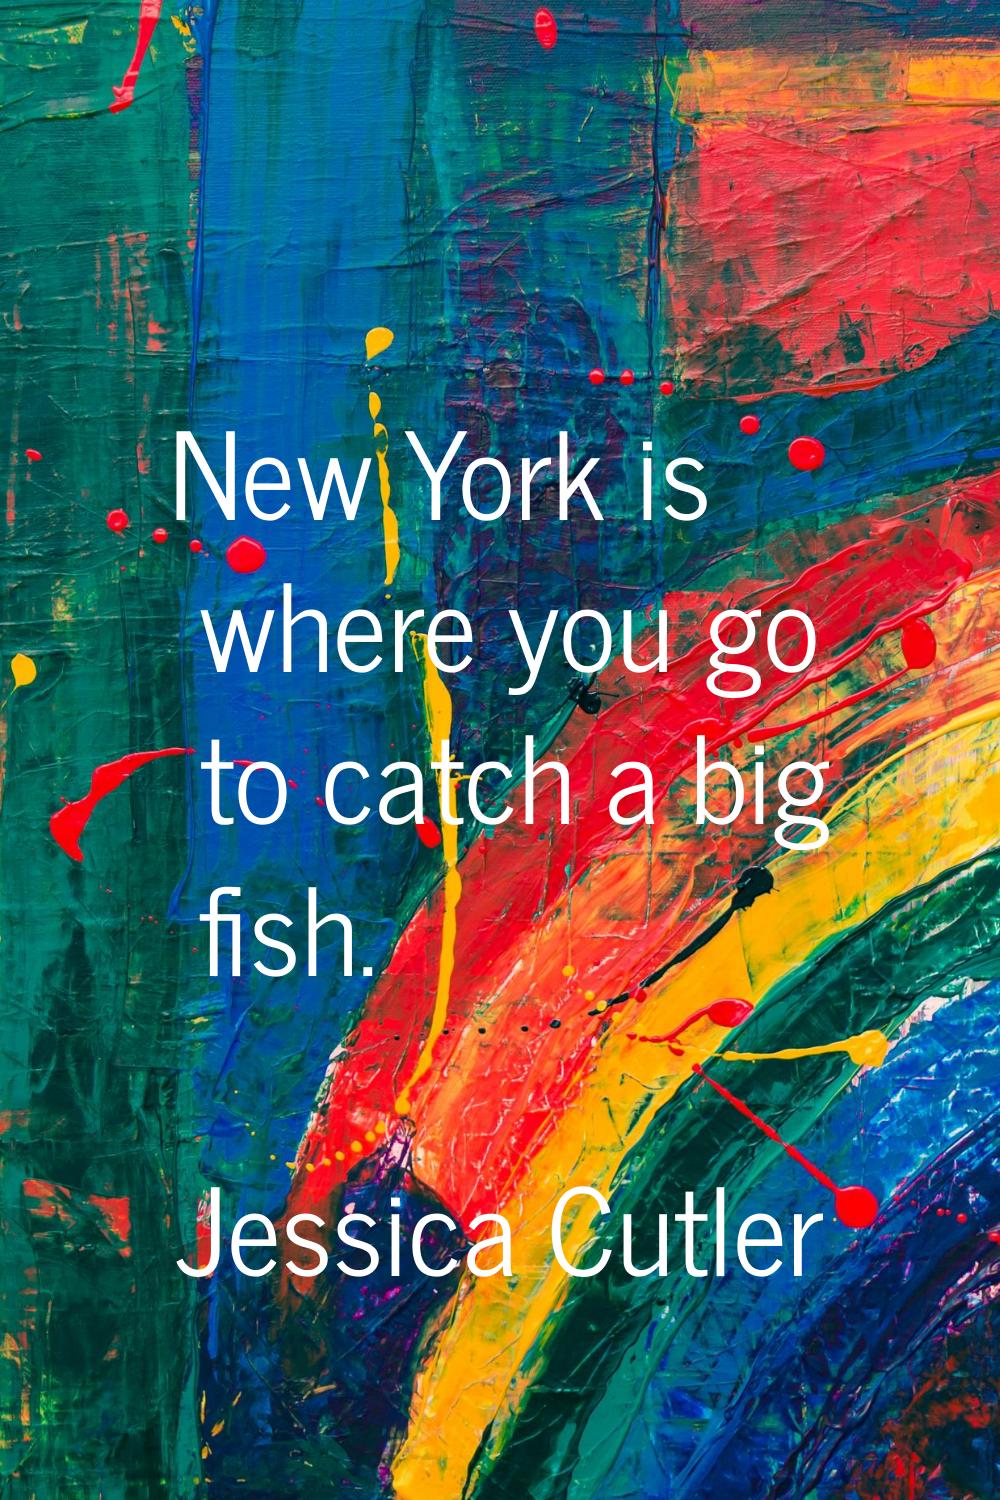 New York is where you go to catch a big fish.